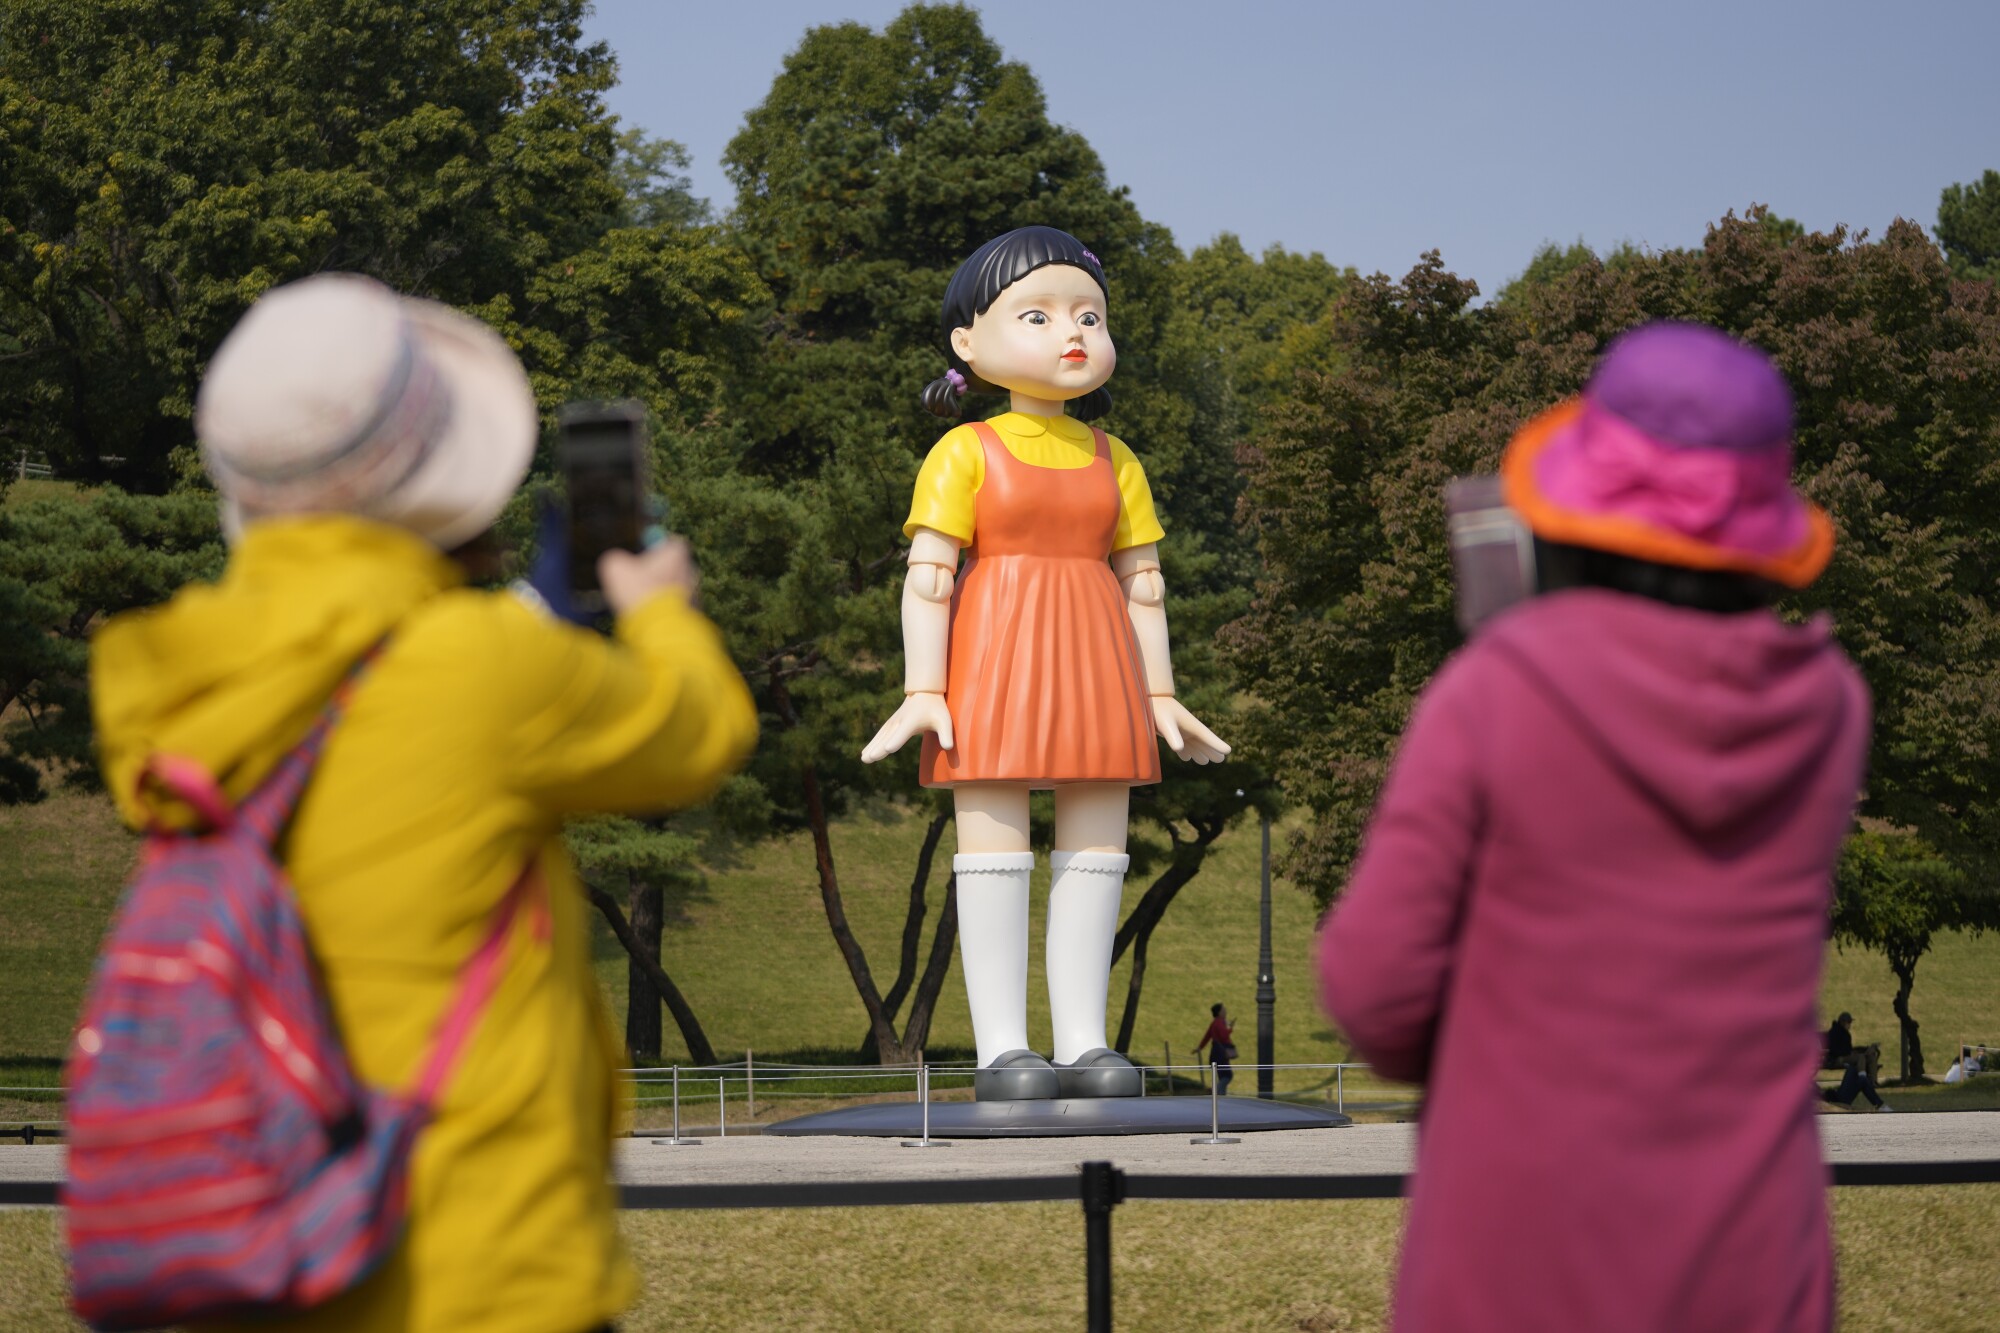 Two people take photos of a giant doll outdoors.